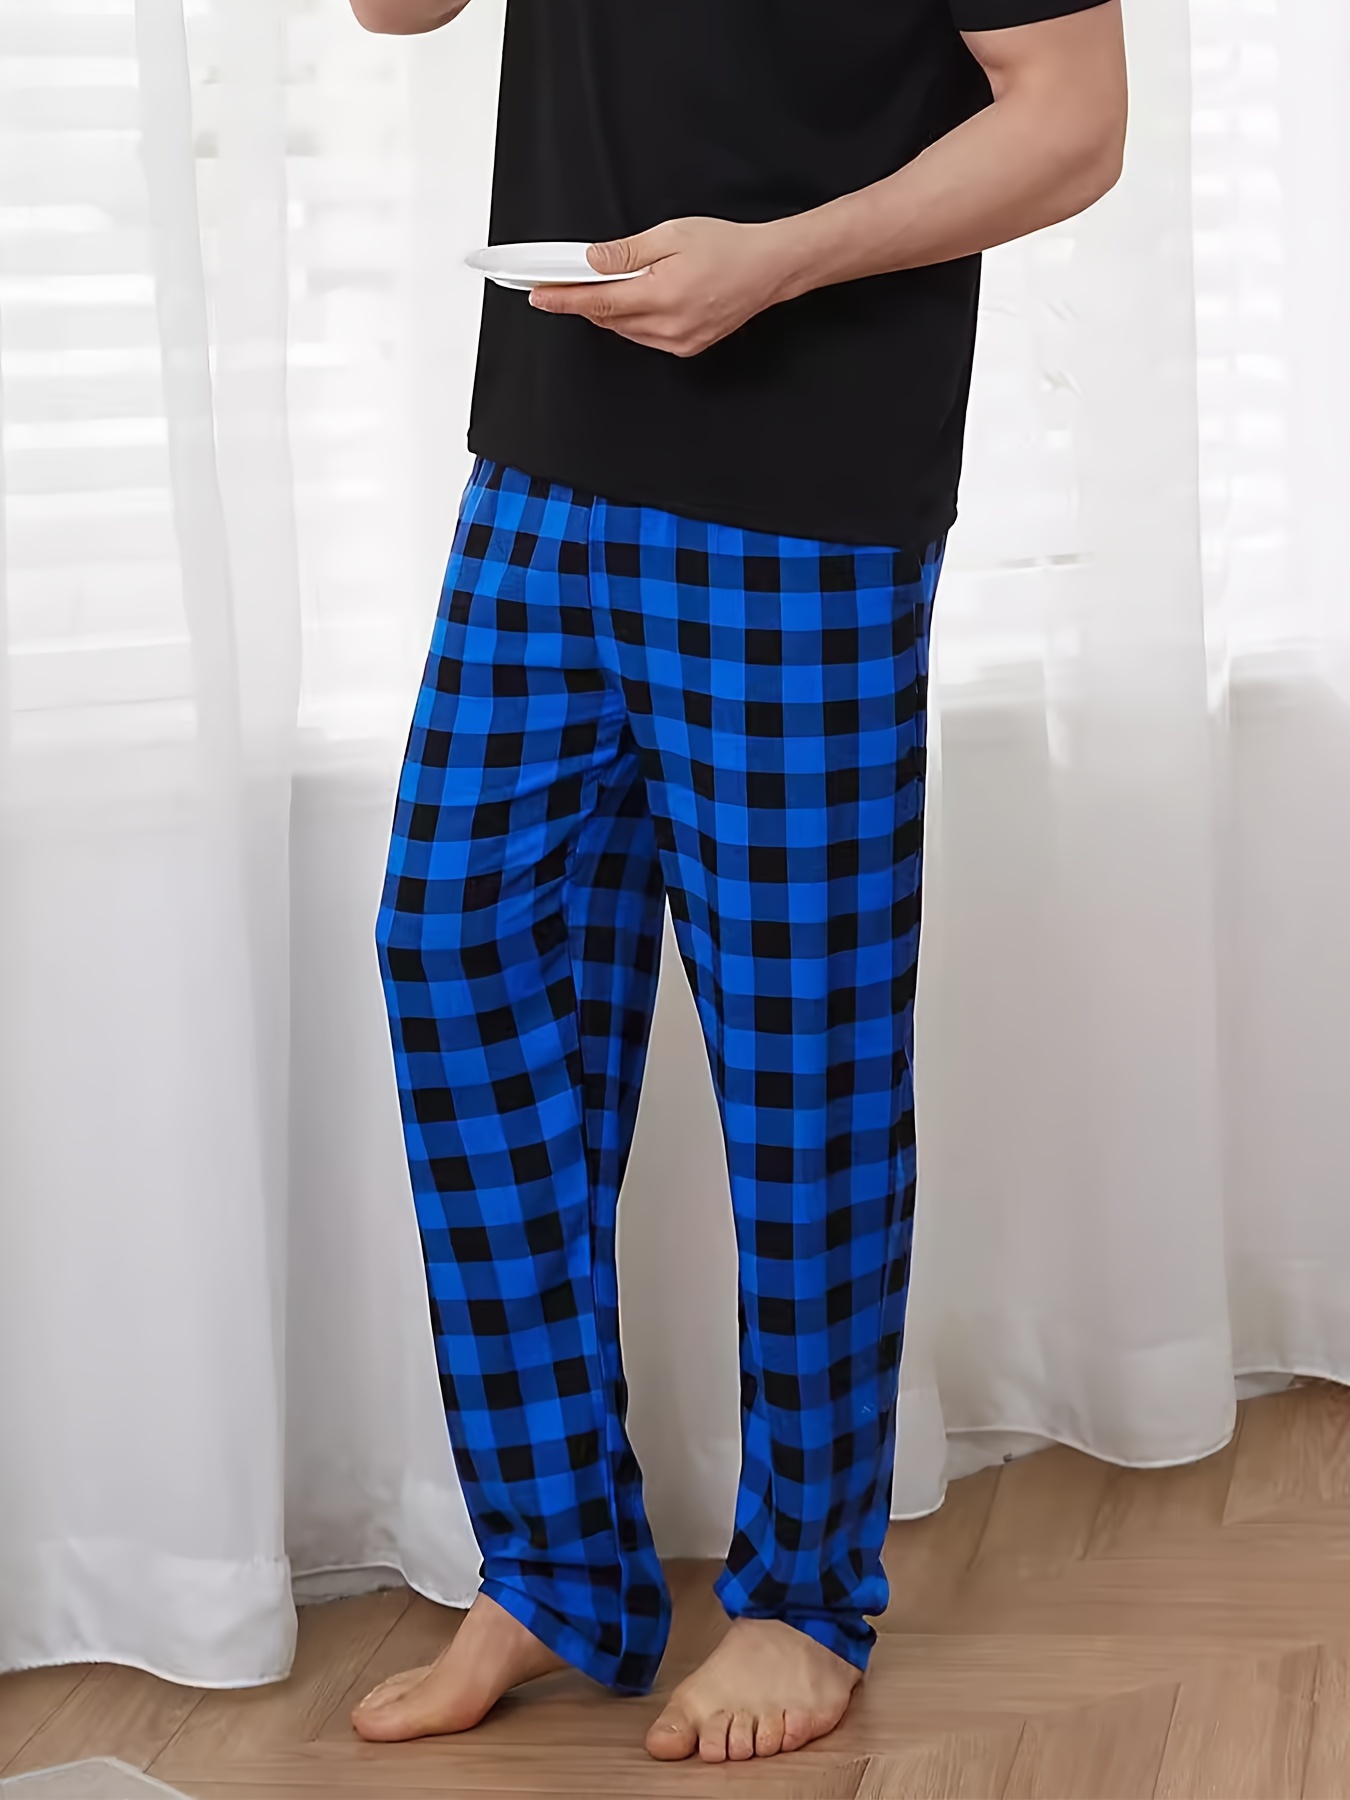 Men's Pajama Pants with Pockets Sleepwear Lounge Pants Stretch Casual Plaid  Black 5 at  Men's Clothing store